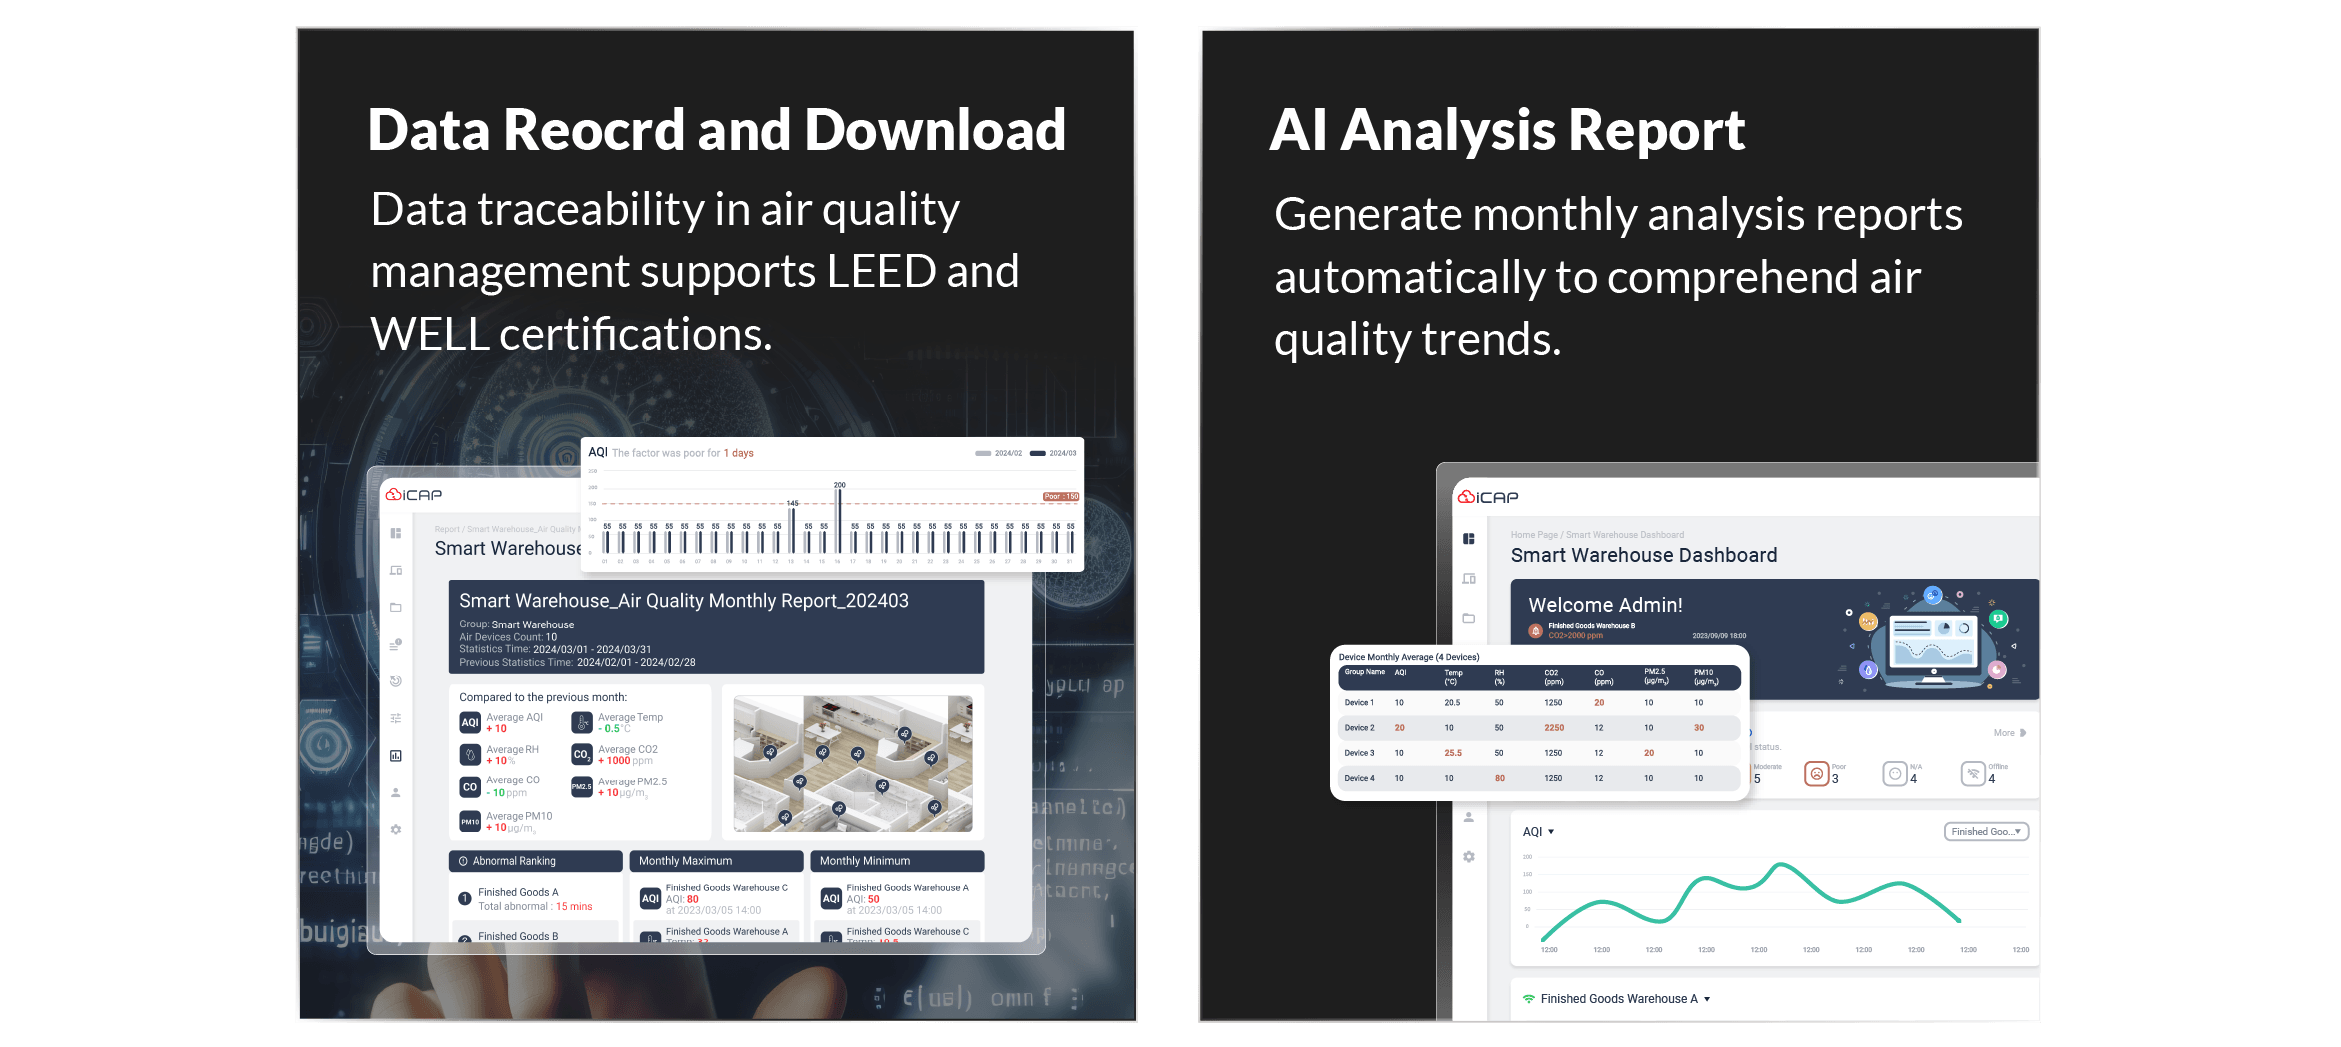 Data Reocrd and Download/Ai Analysis Report